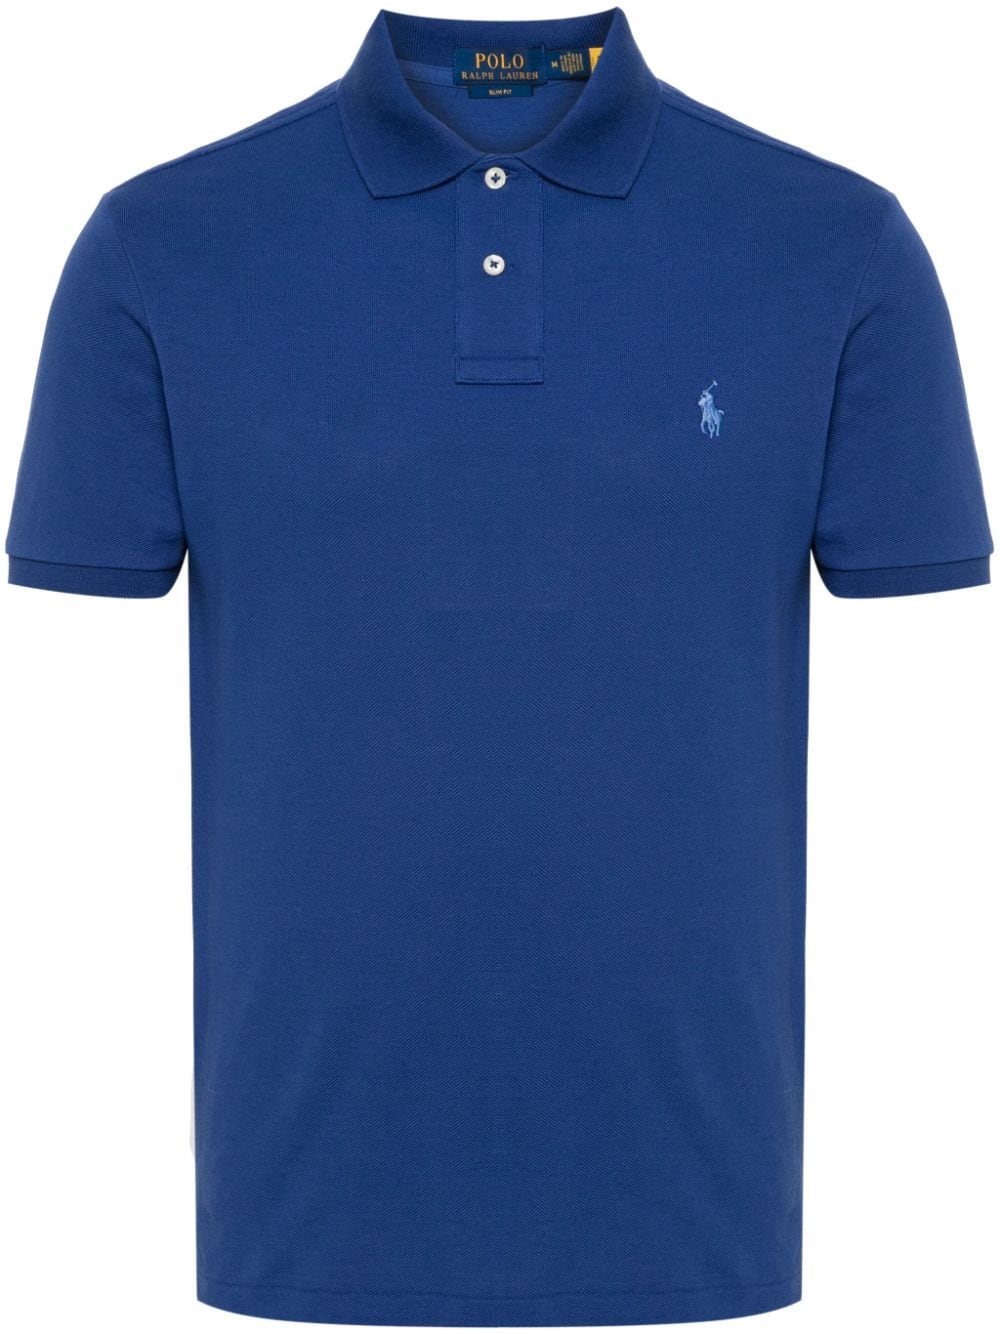 Polo Ralph Lauren Polo Pony embroidered cotton polo shirt - Blue von Polo Ralph Lauren